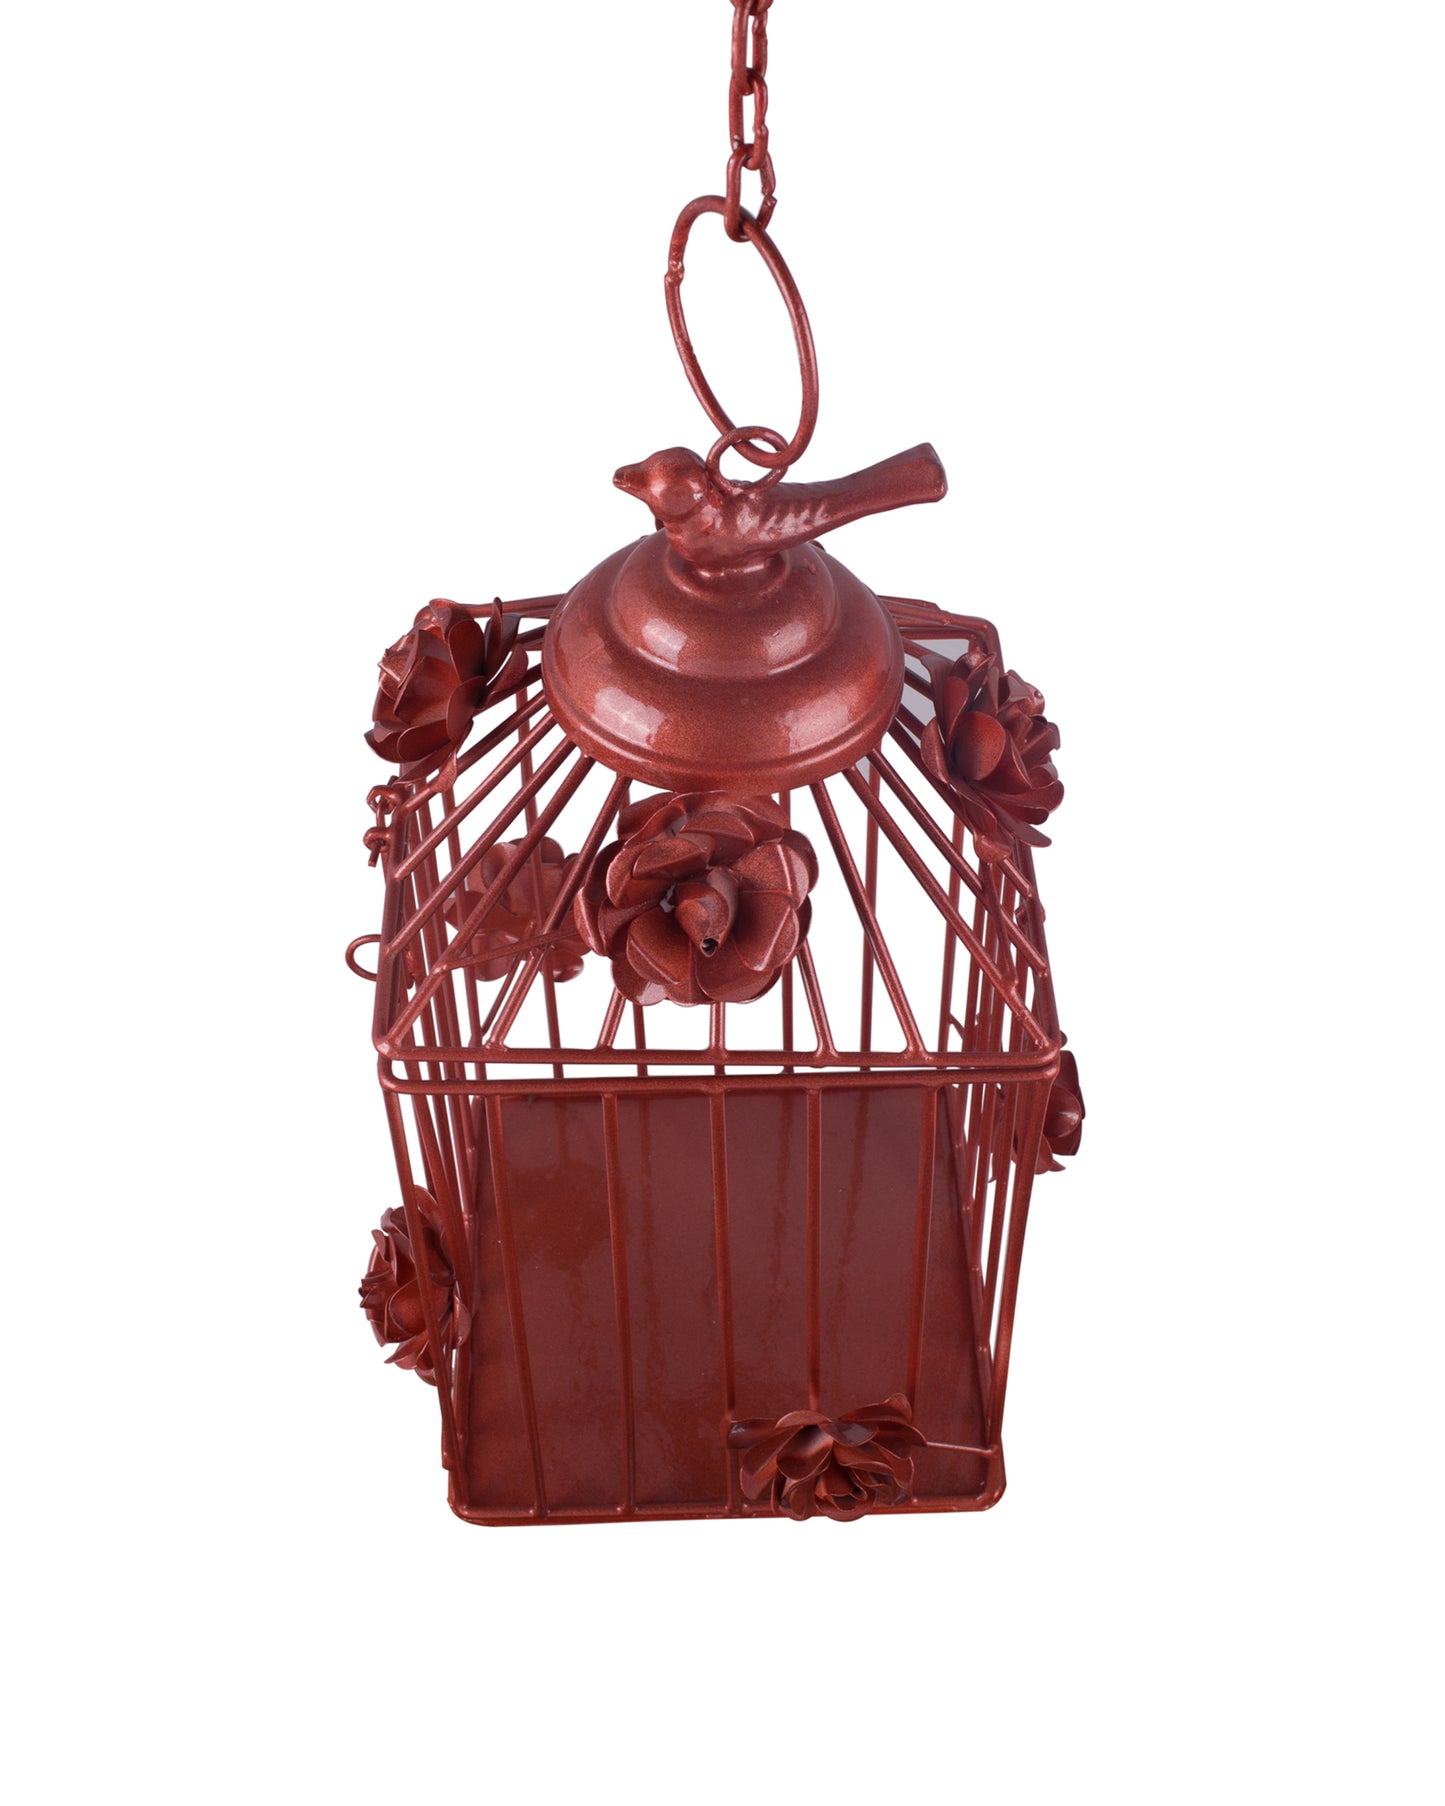 Decorative Hanging Bird Cage, Balcony/Patio Planter cage/hanging Candle holder